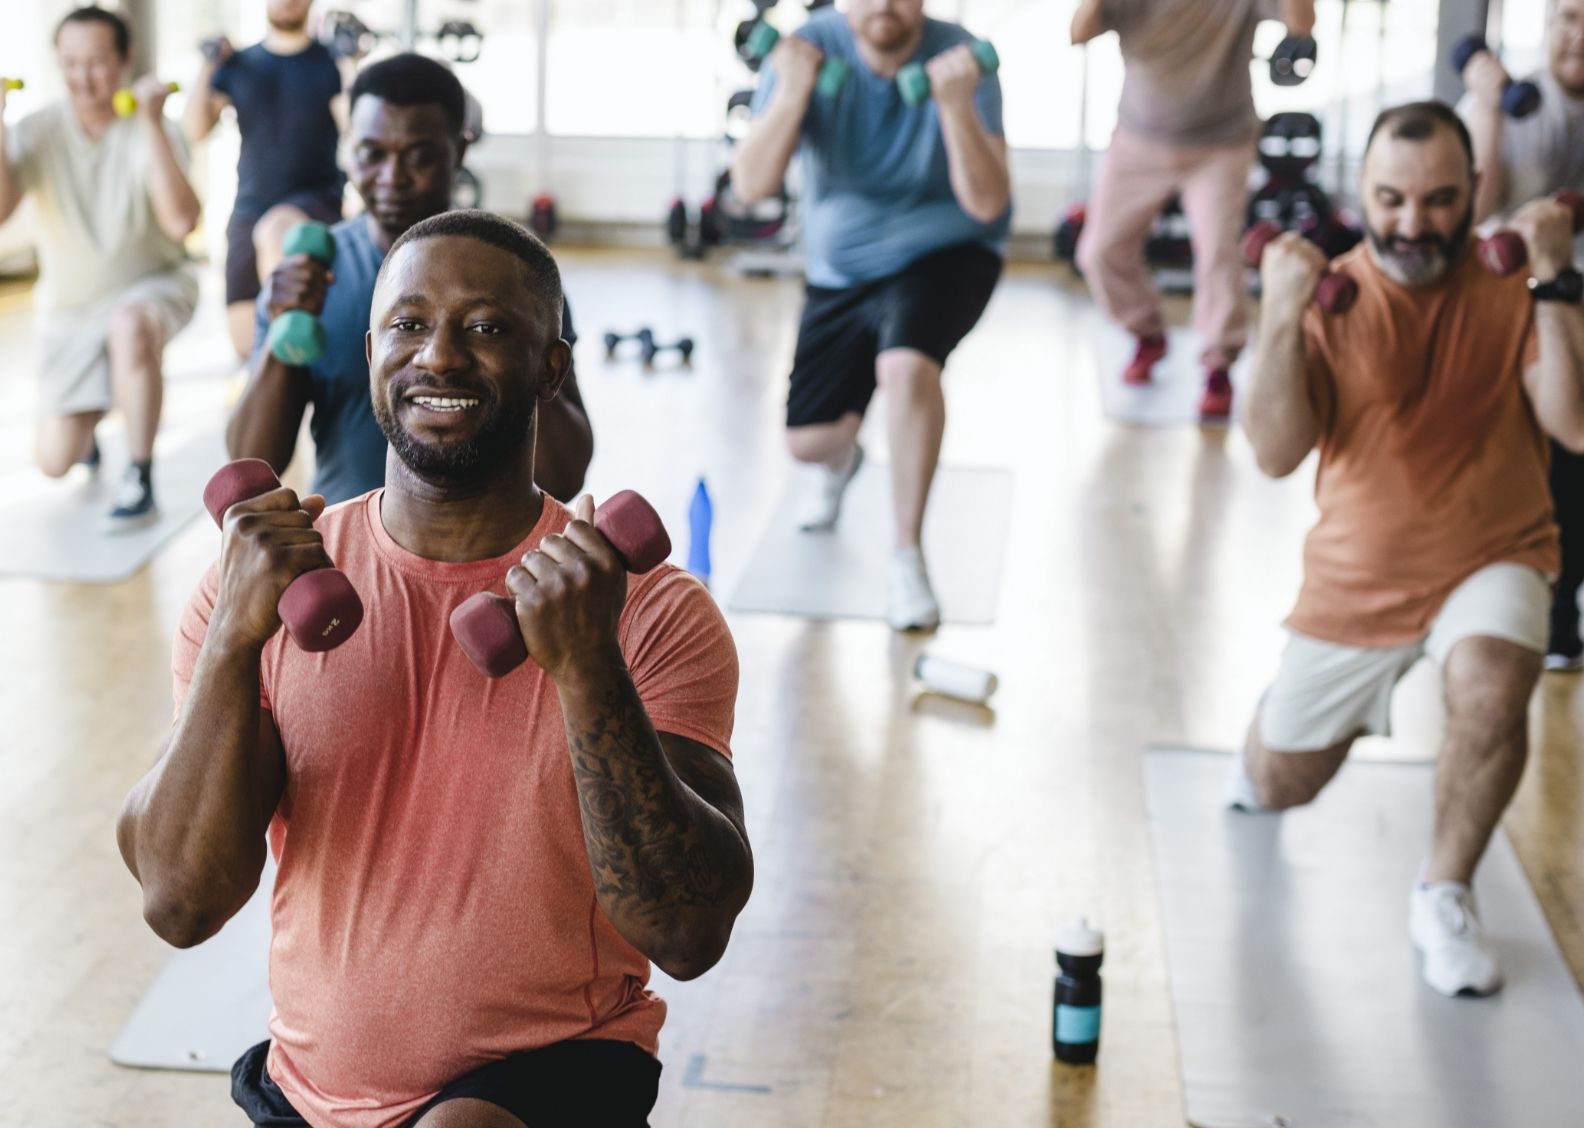 Man leads exercise class of other men.